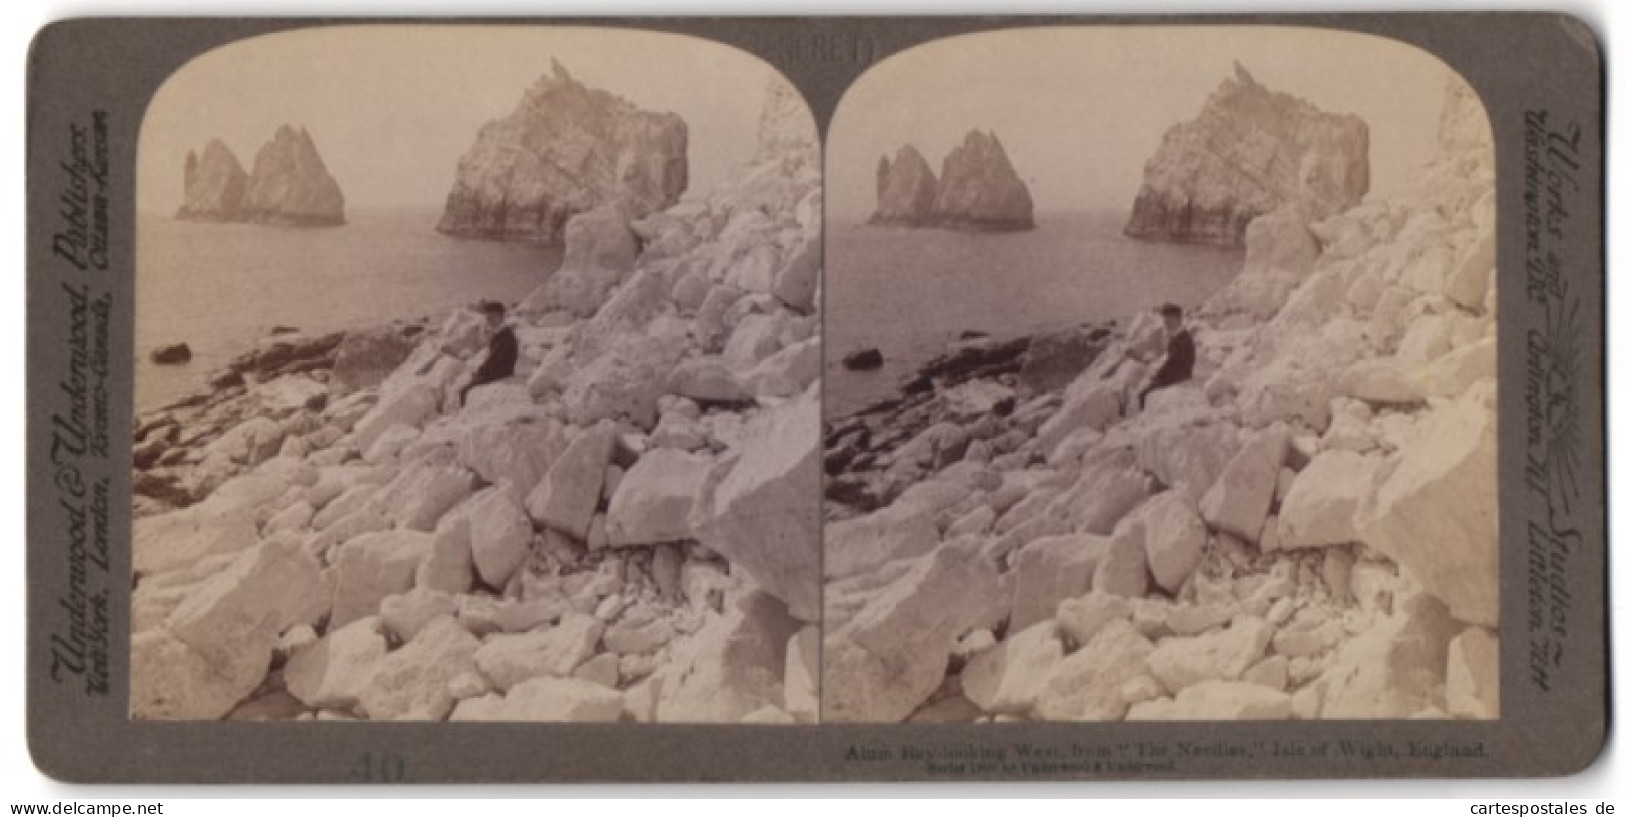 Stereo-Photo Underwood & Underwood, New York, Ansicht Isle Of Wight, Felsformation The Needles  - Stereo-Photographie